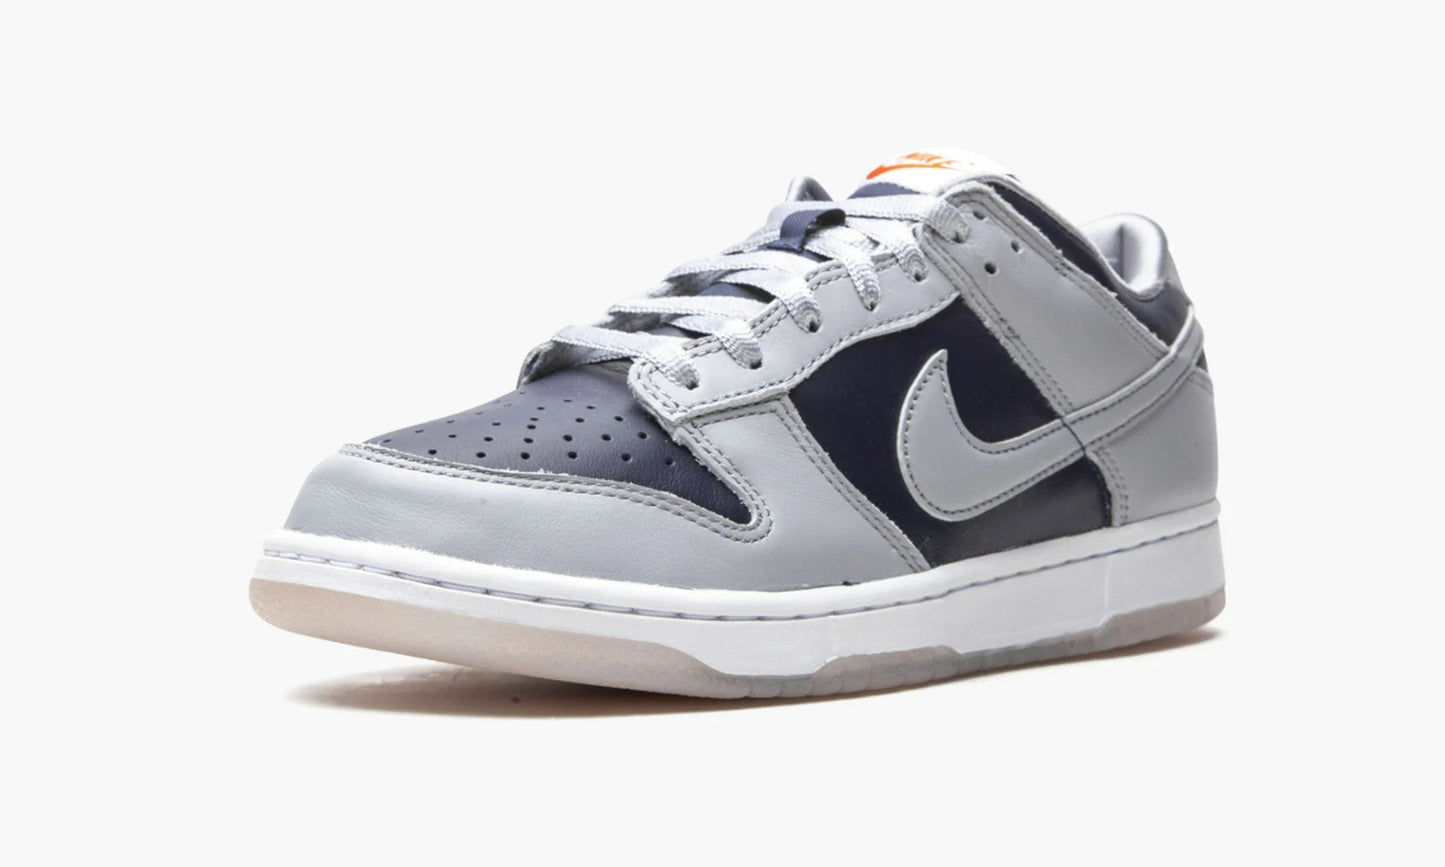 Dunk Low WMNS College Navy Grey - DD1768 400 | The Sortage